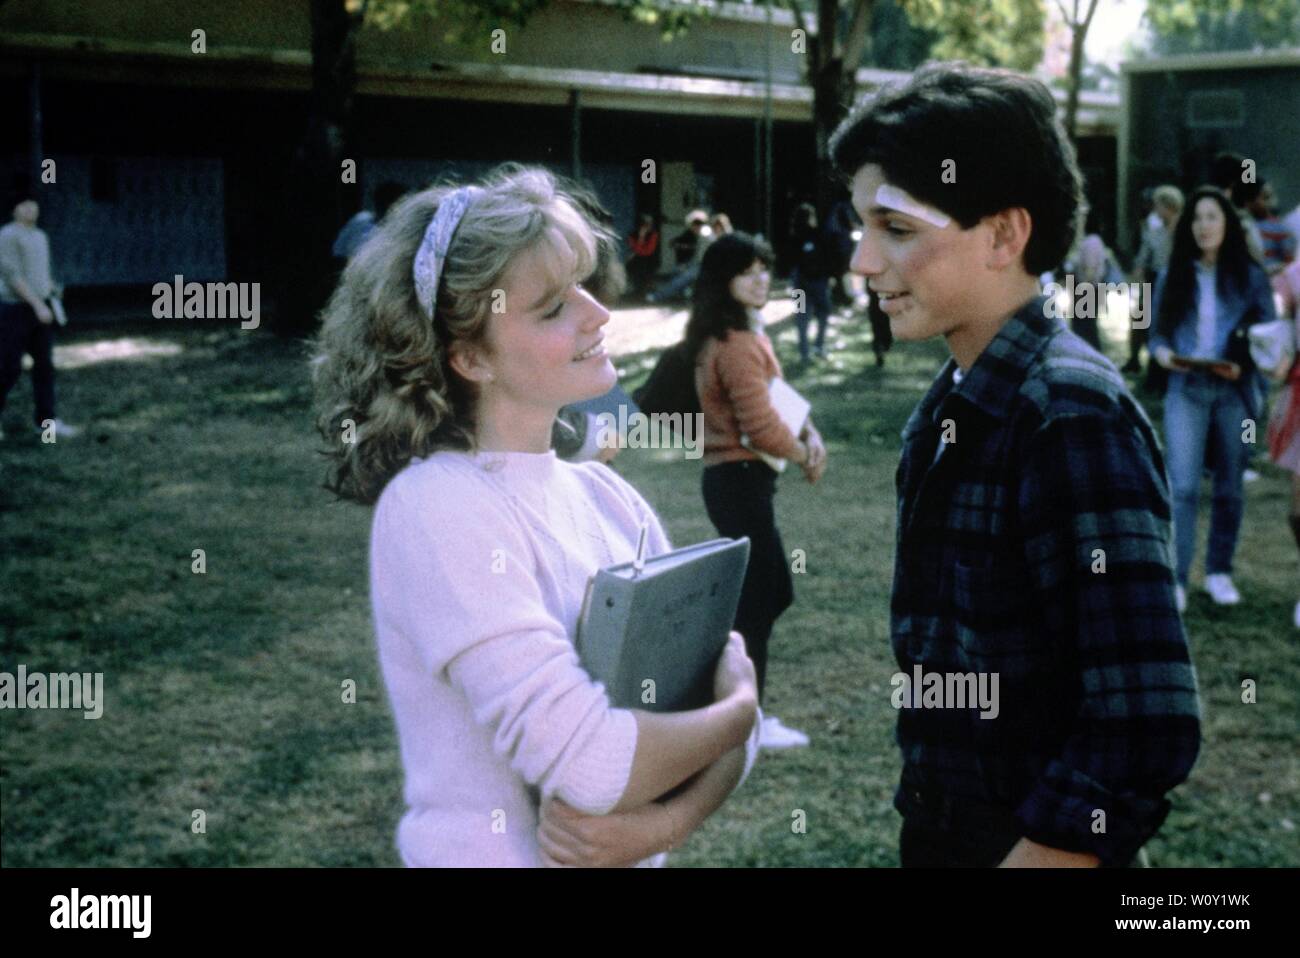 ELISABETH SHUE and RALPH MACCHIO in THE KARATE KID (1984). Credit: COLUMBIA PICTURES / Album Stock Photo